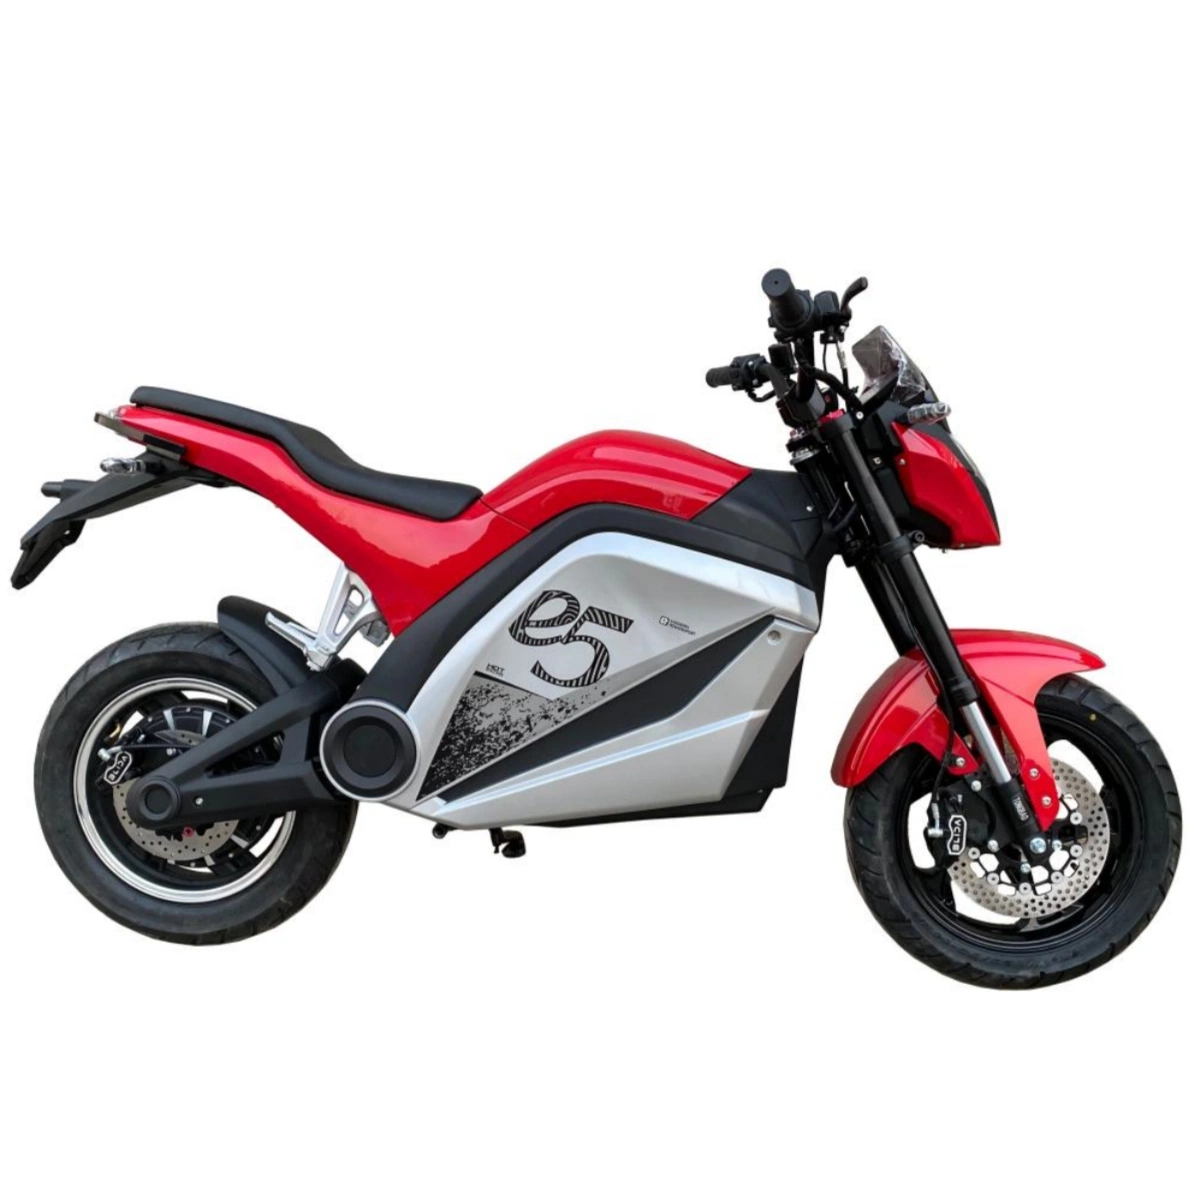 Em-M6, Electric Motorcycle, Electric Vehicle, E Motor, E Motorcycle